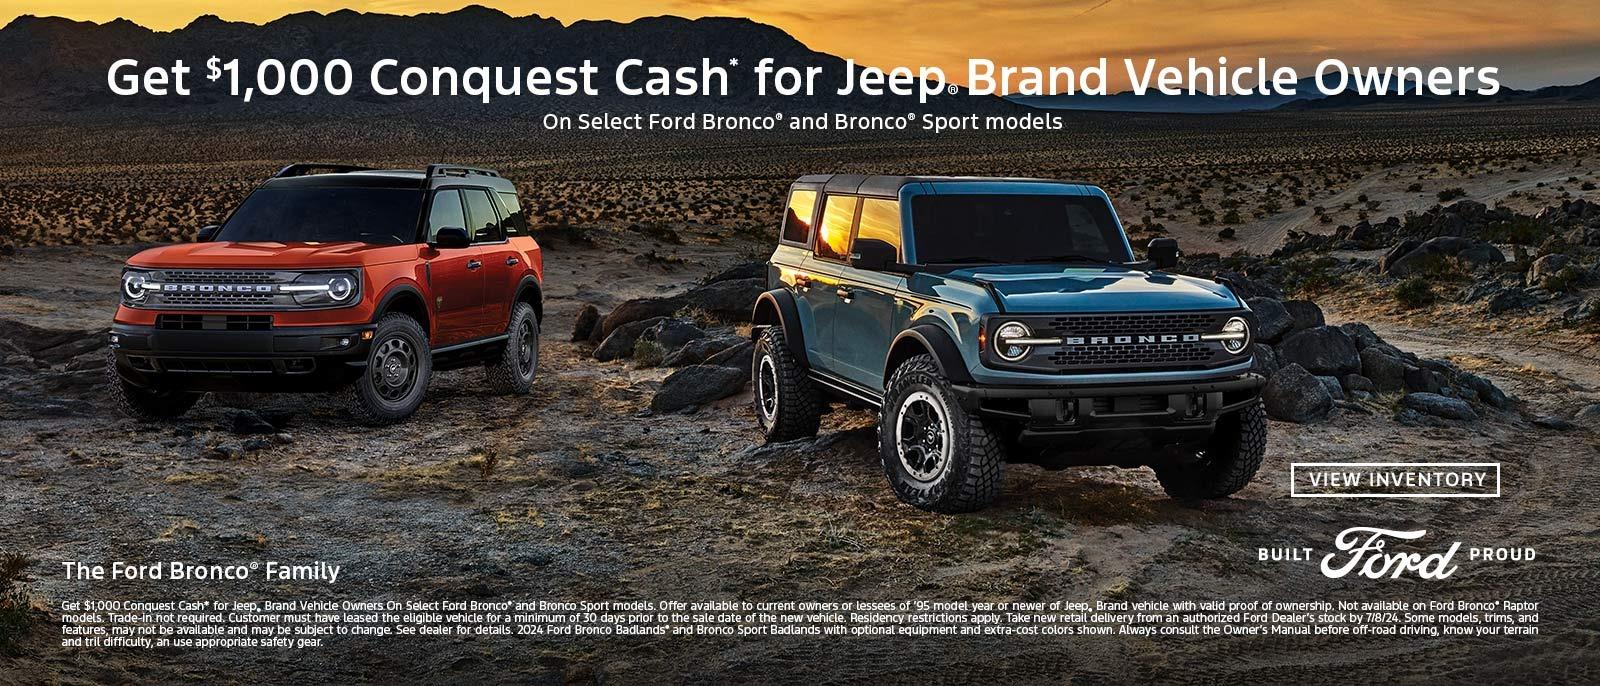 Get $1,000 Conquest Cash for Jeep Brand Vehicle Owners